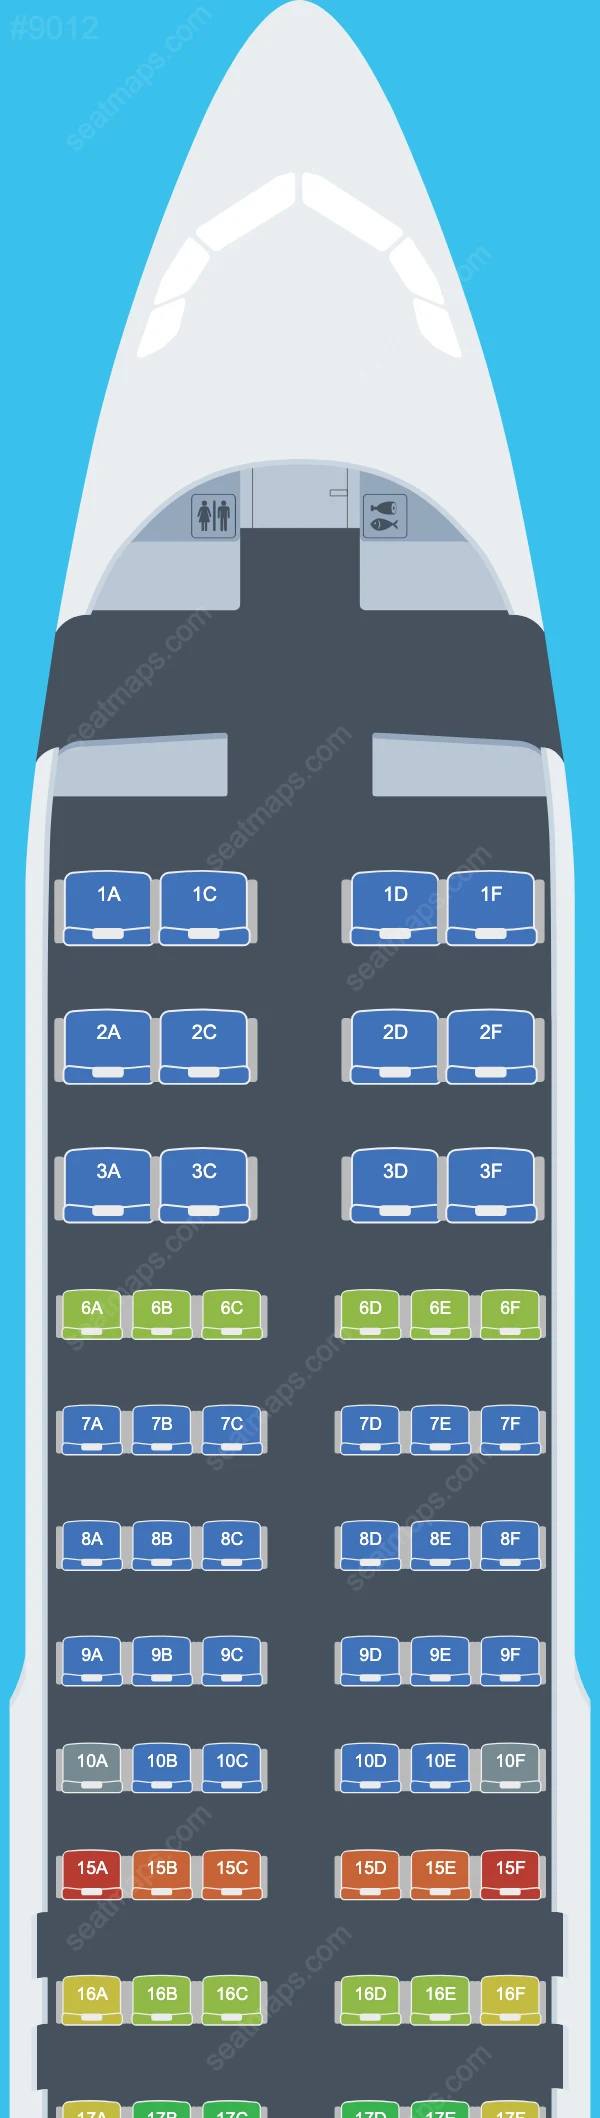 Alaska Airlines Airbus A320 Seat Maps A320-200 V.1